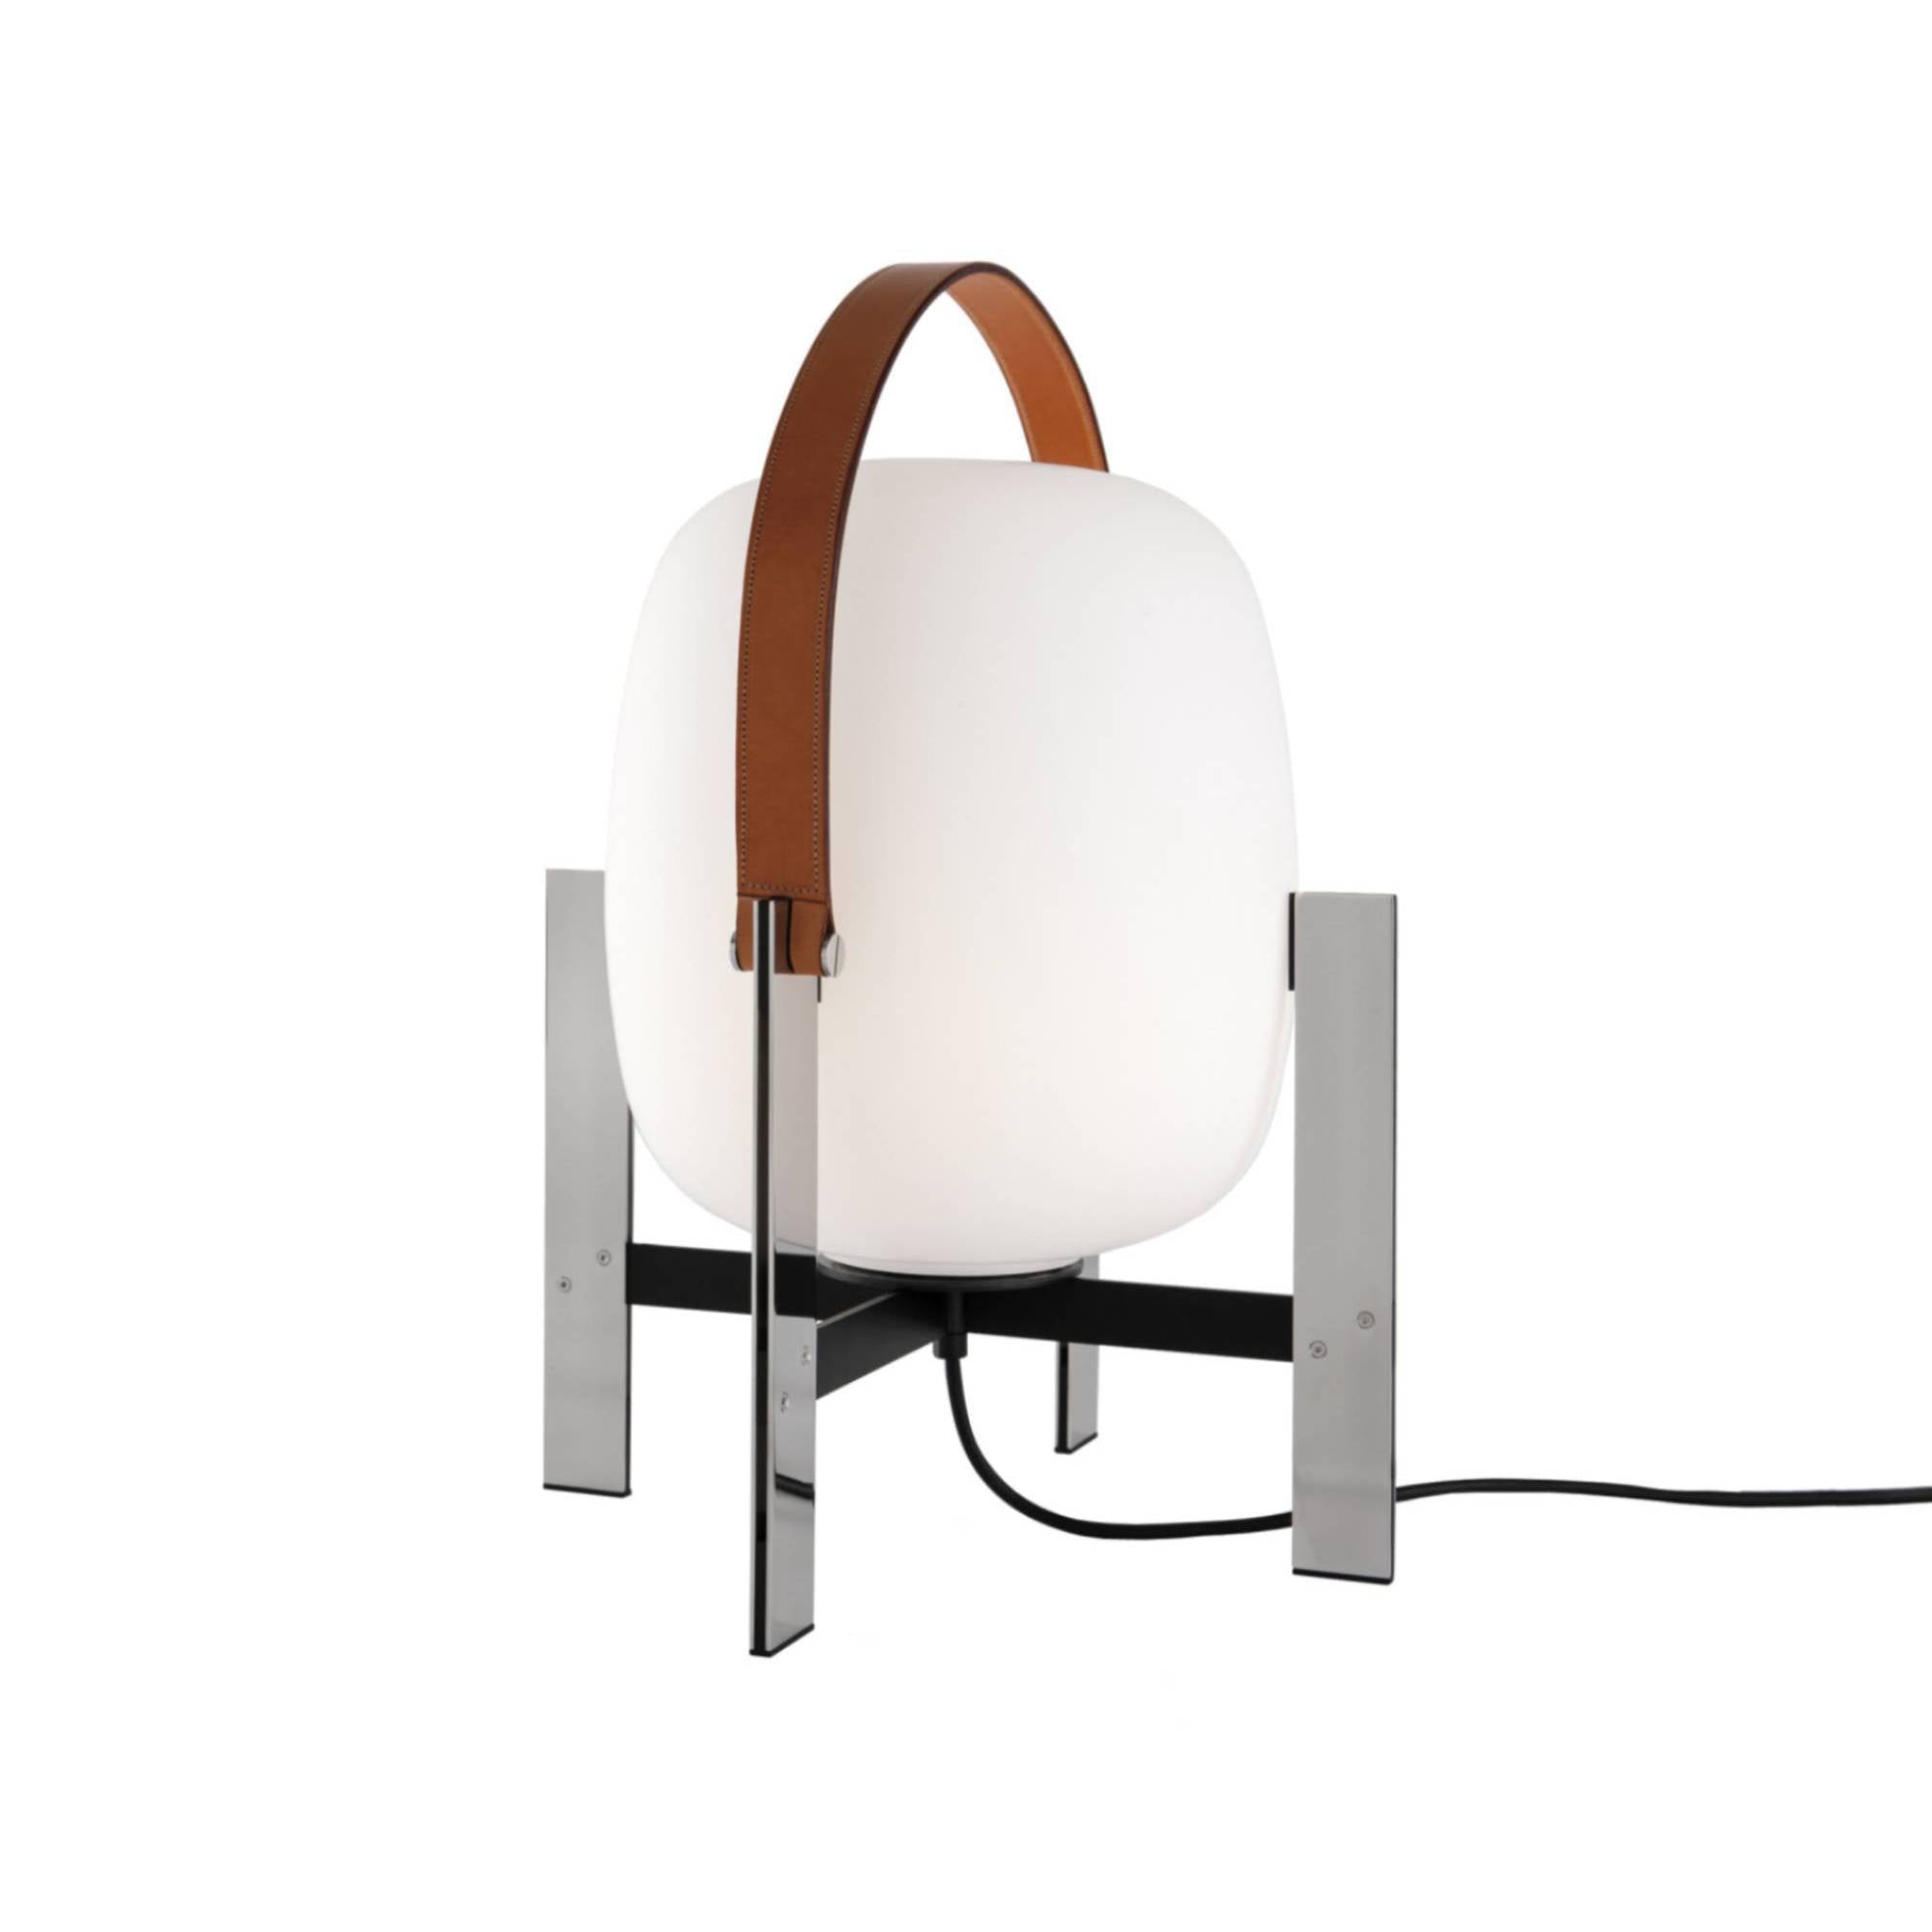 Cesta Metálica Table Lamp: Natural Leather Handle